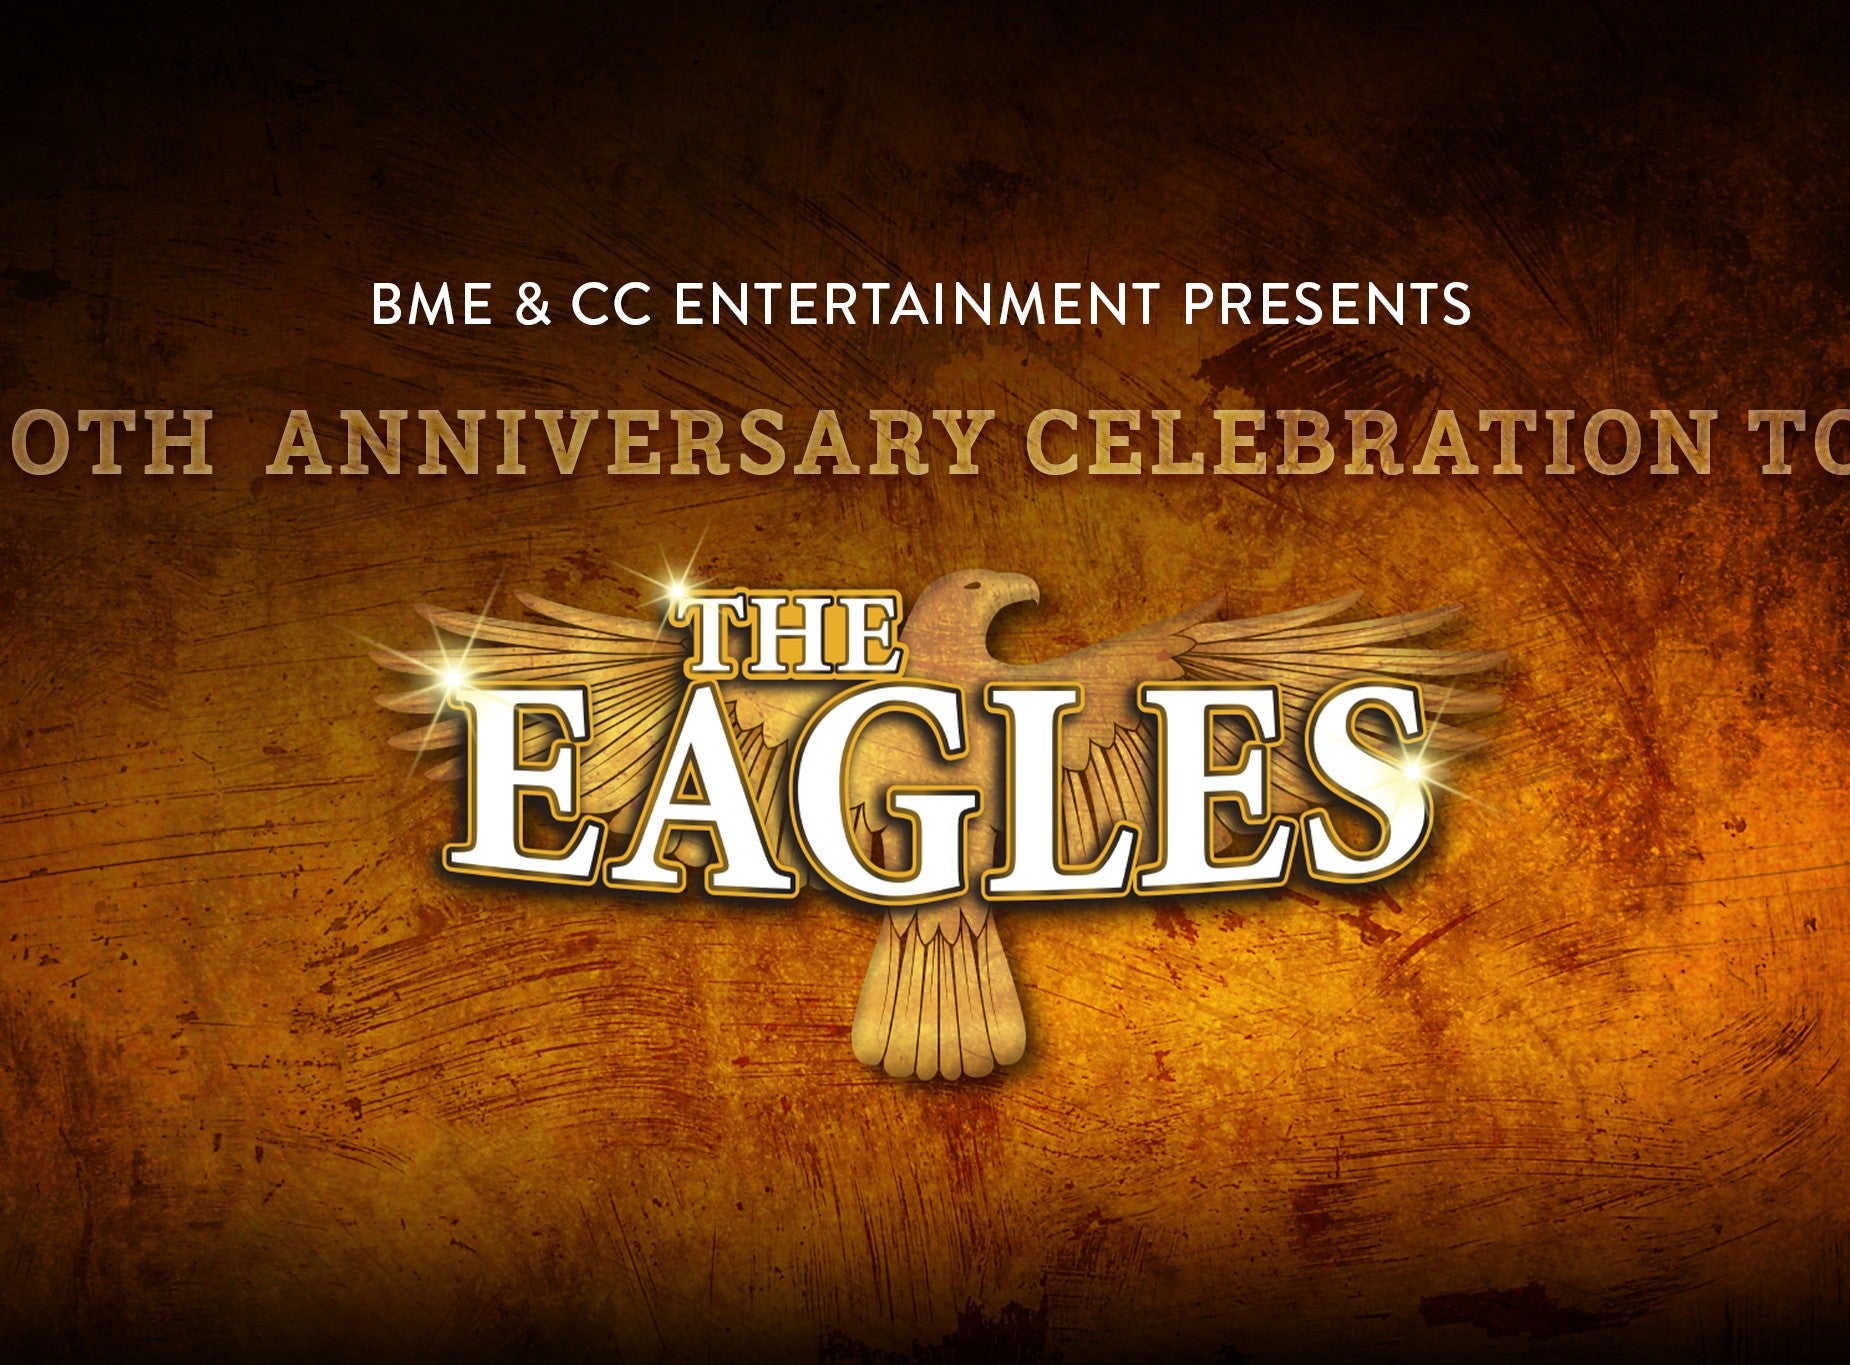 Image used with permission from Ticketmaster | The Eagles Ultimate Celebration tickets